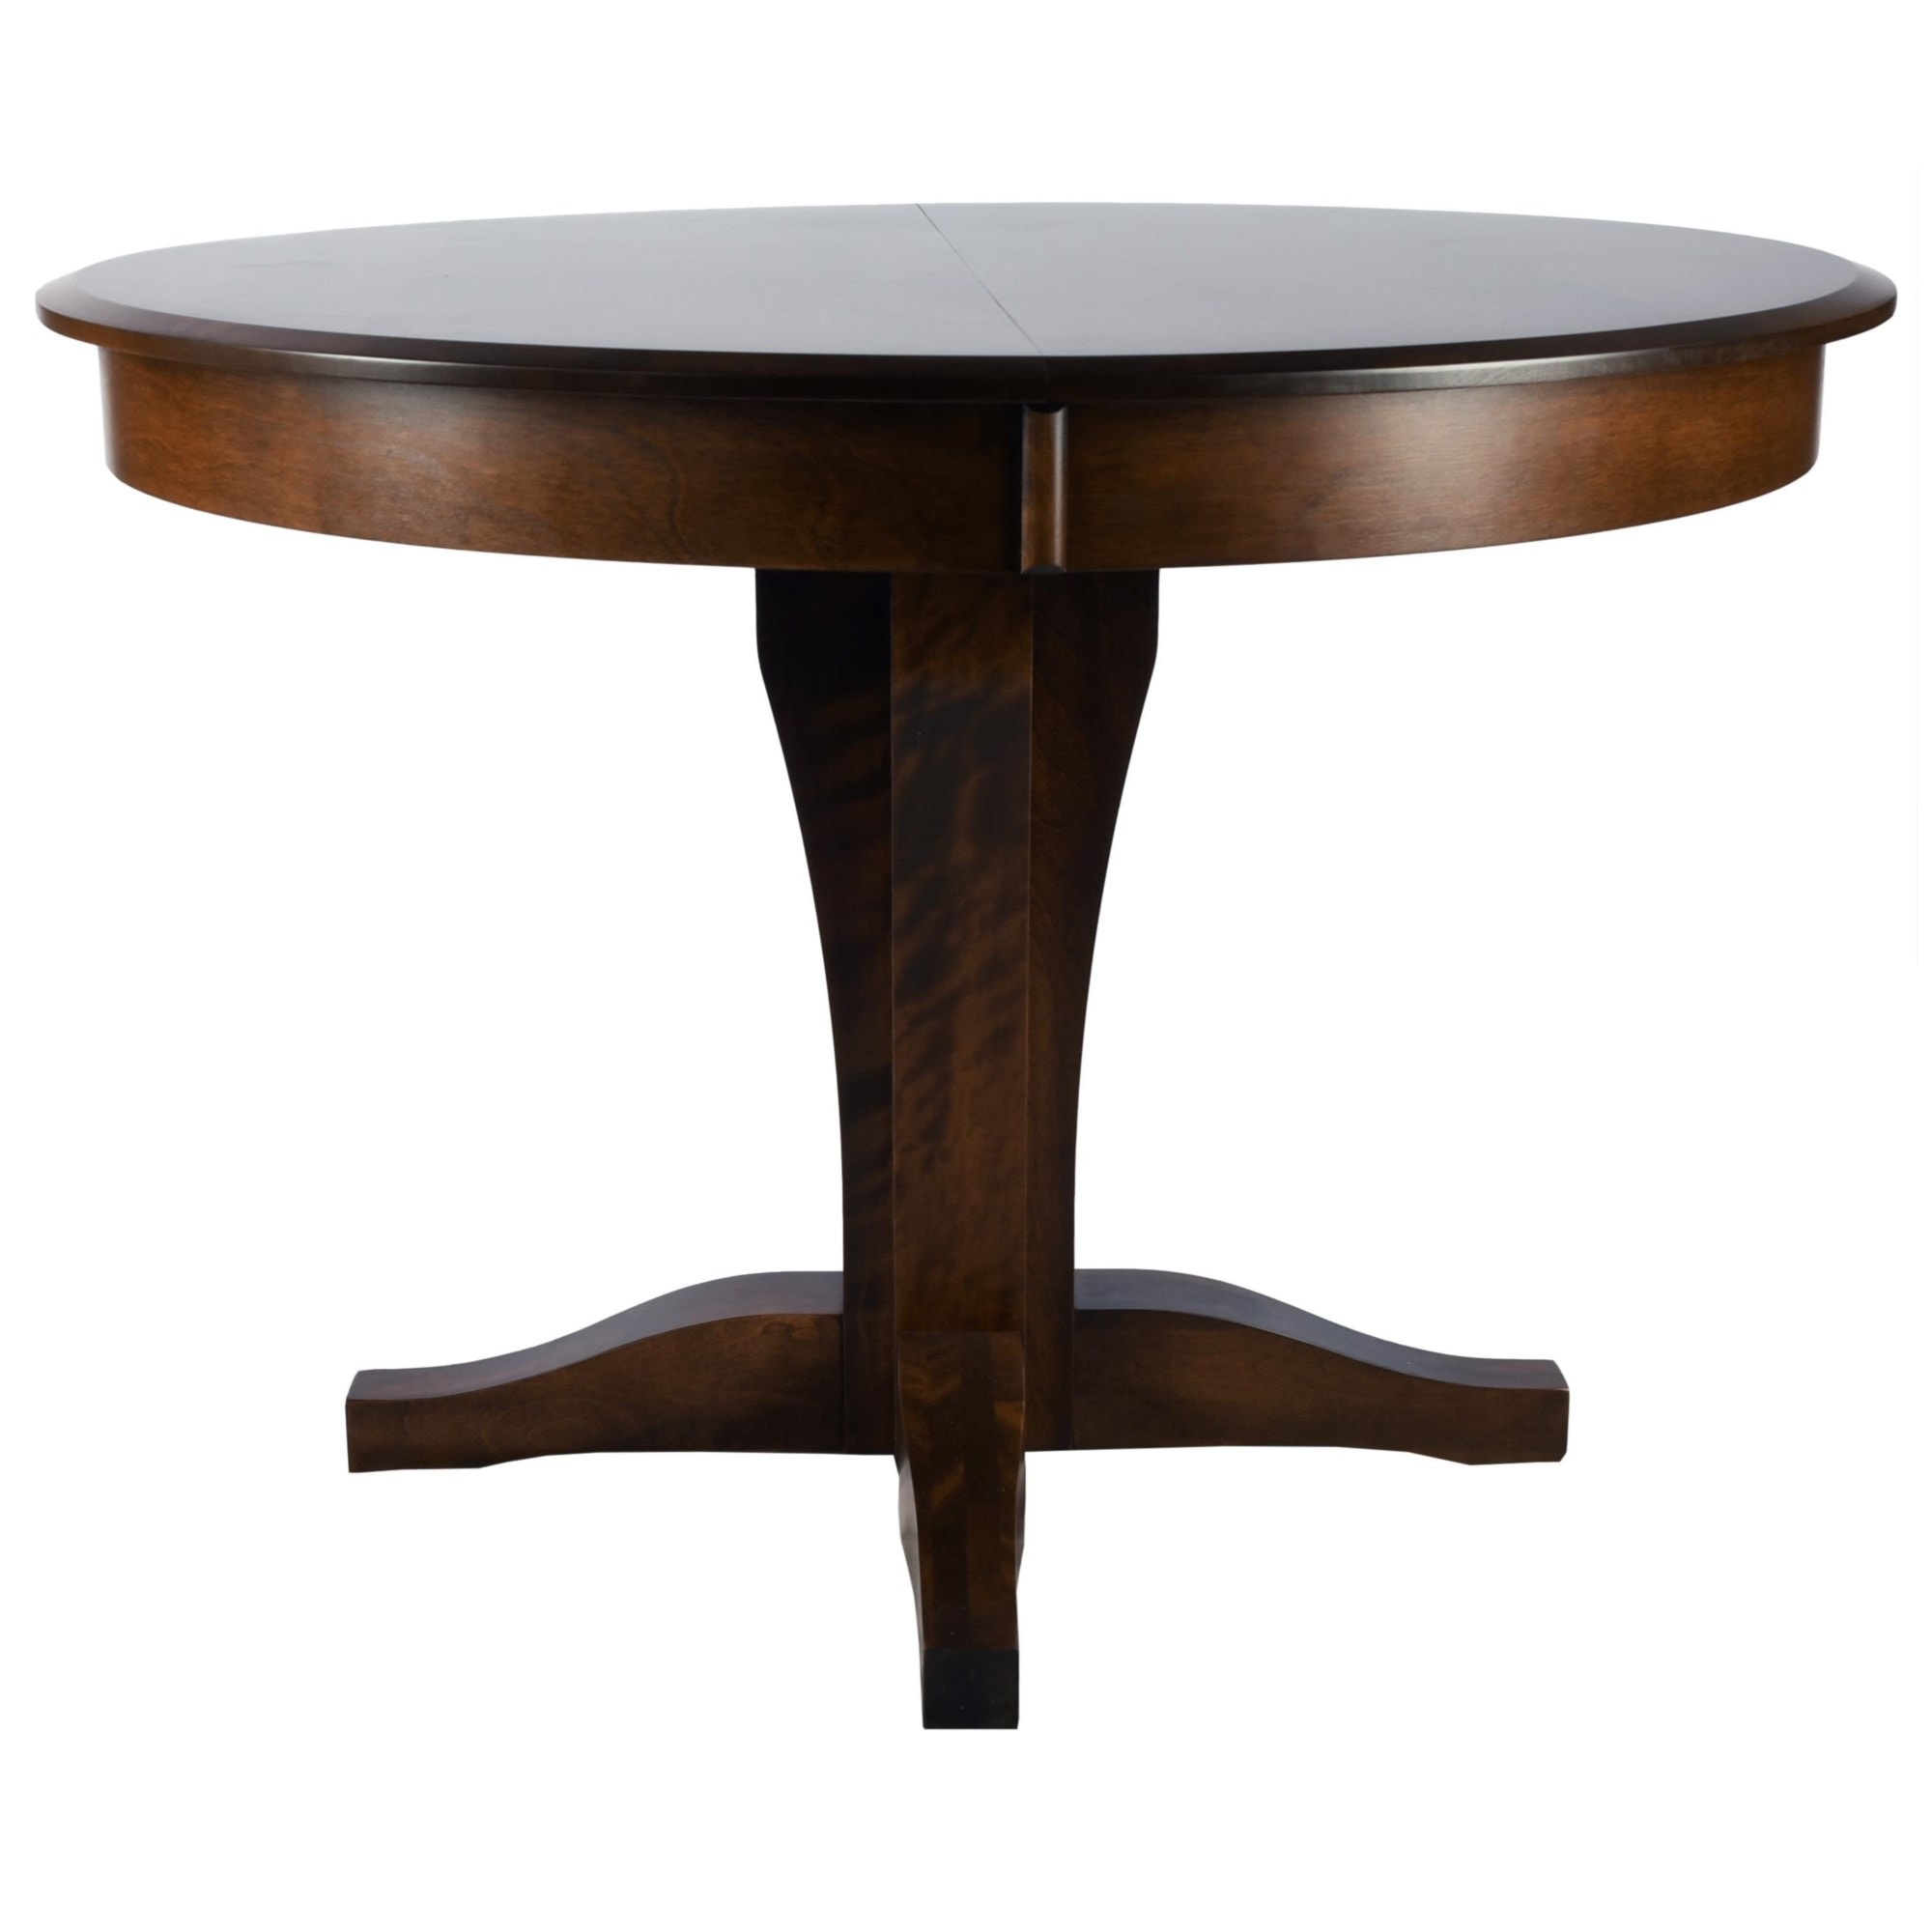 Shop the Table from Option 2